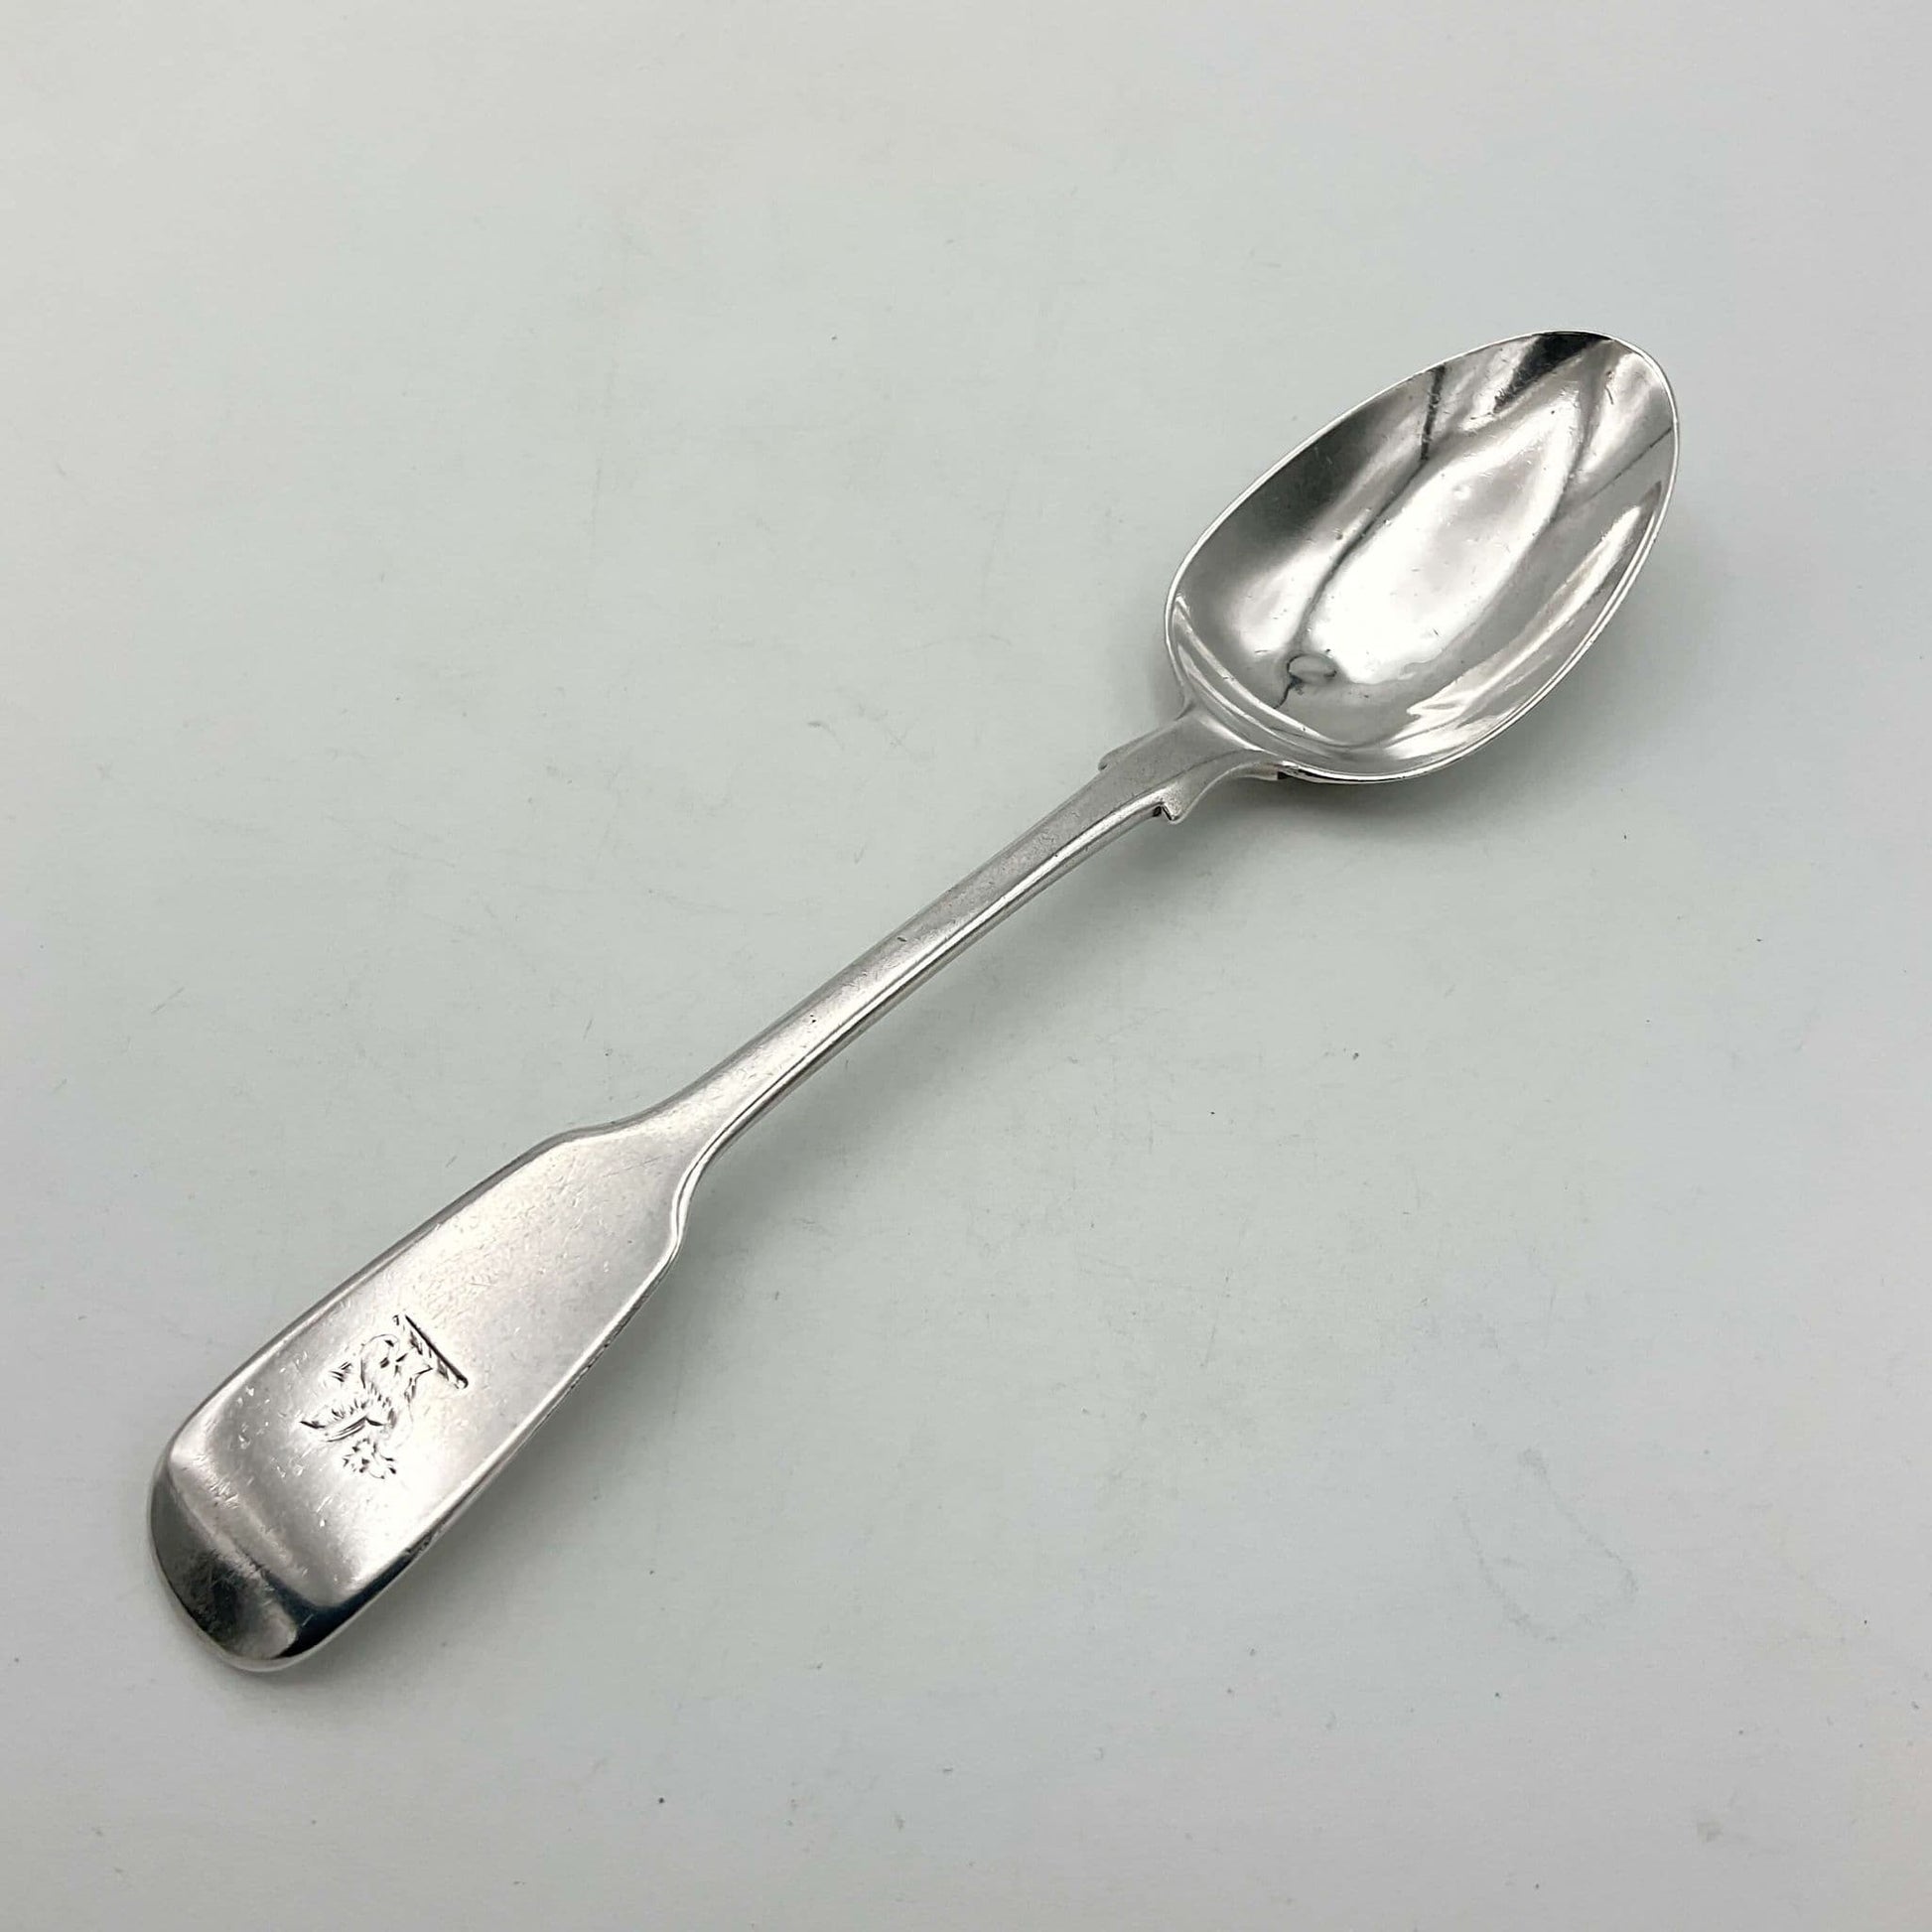 Antique Silver Teaspoon on a white background